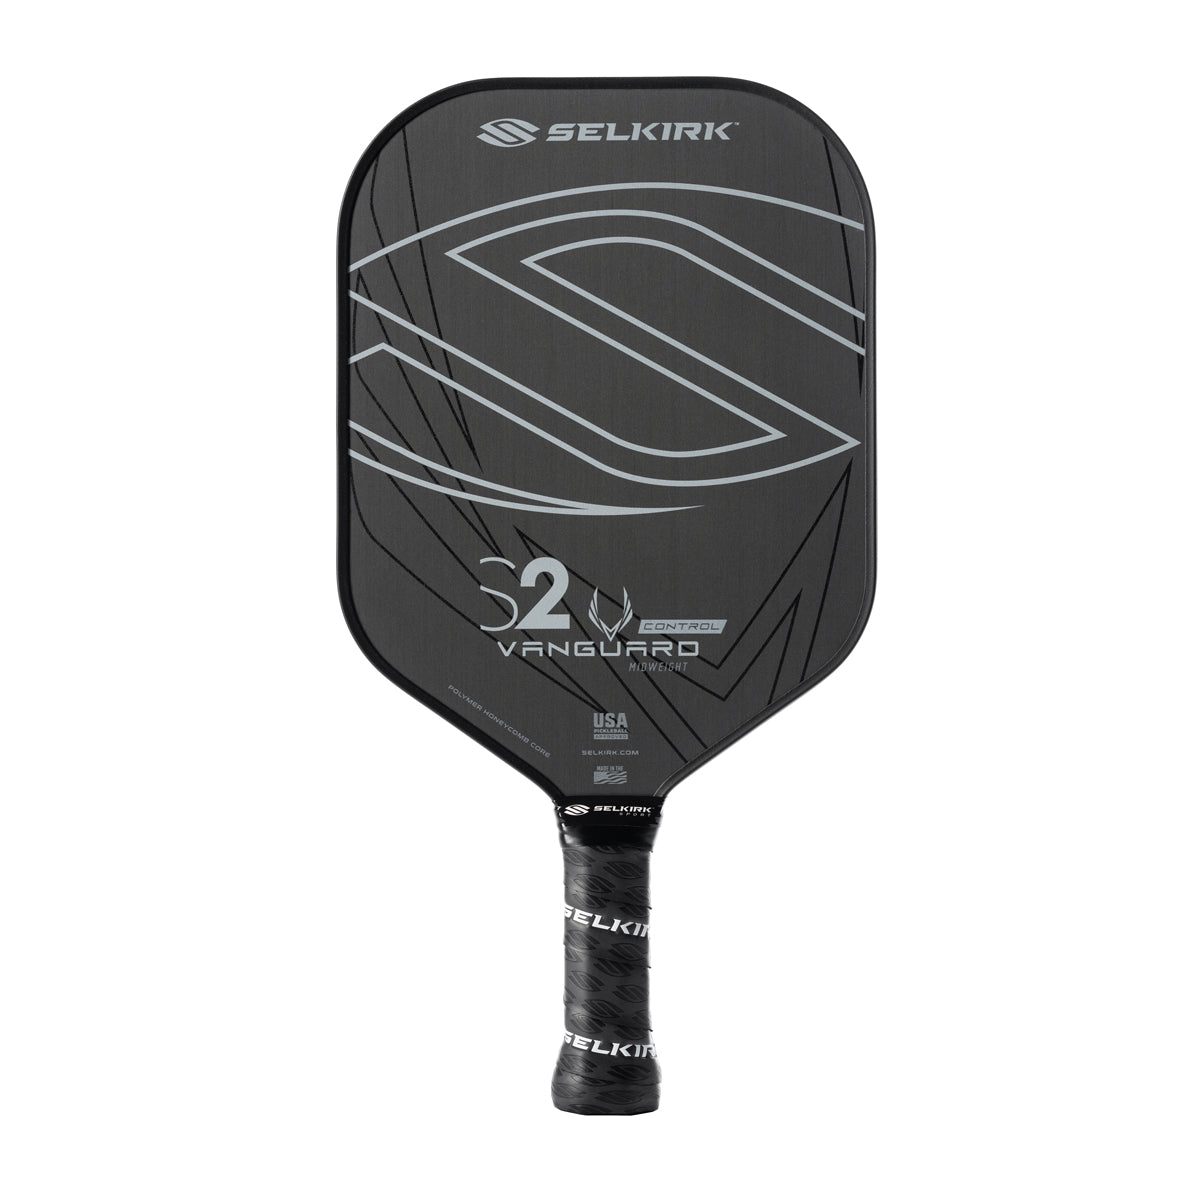 Selkirk Vanguard Control S2 Midweight Pickleball Paddle